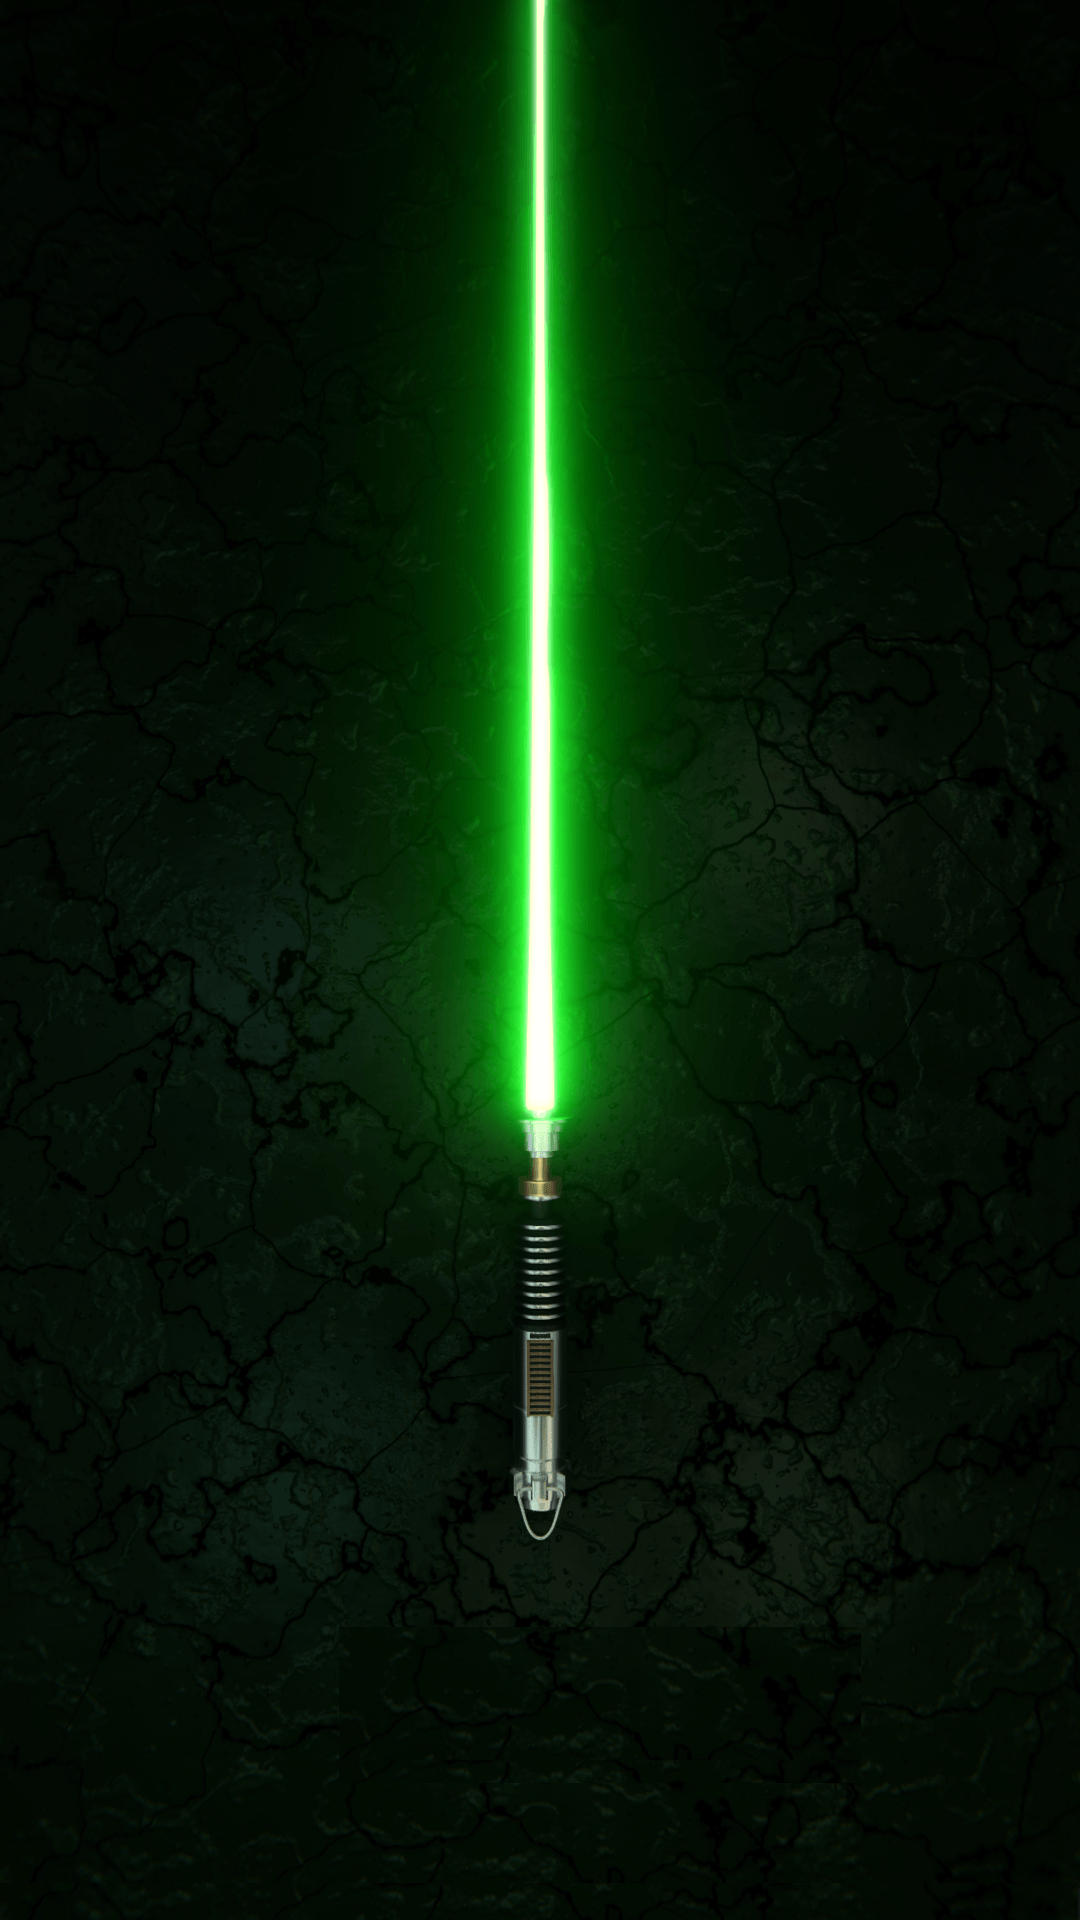 Star Wars Lightsaber to see more exciting Star Wars